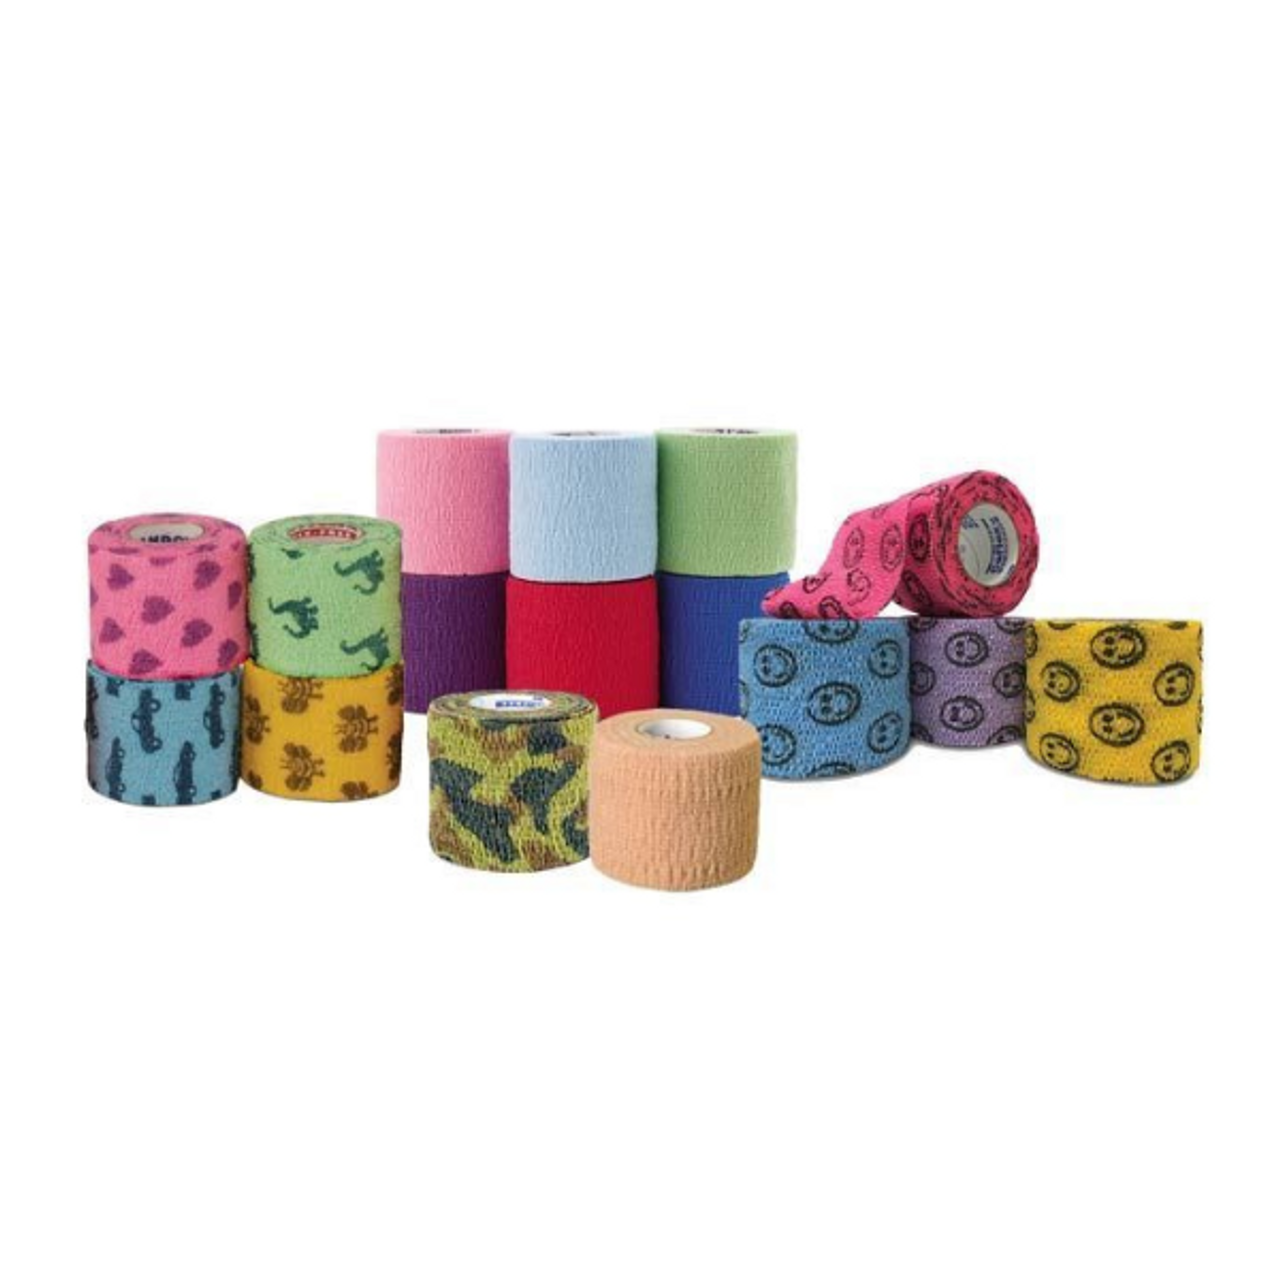 Self Adherent Cohesive Wrap Bandages - 2 inch by 5 Yards self Adhesive Non  Woven Bandage Rolls - Stretch Wrap - Multi Colored Neon Athletic Tape for  Wrist - Medical Tape 